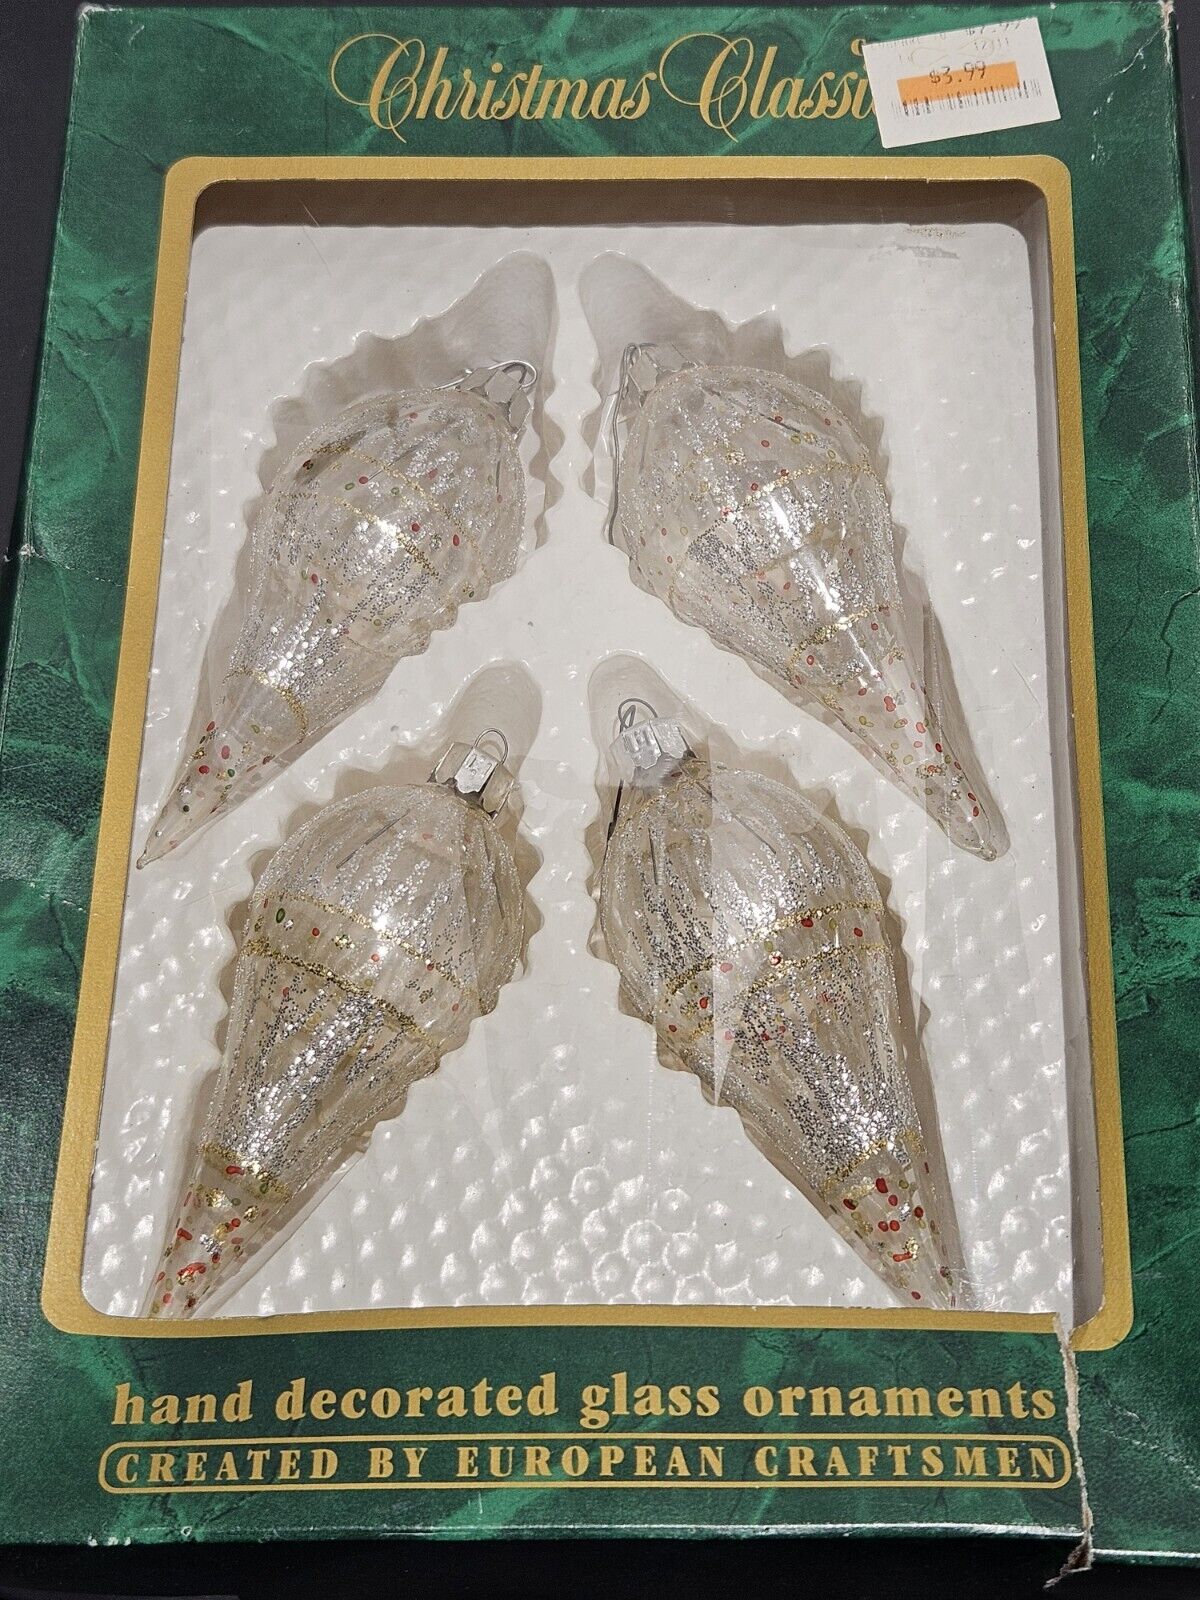 4 Vintage Tear Drop Hand Decorated Ornaments Glass Christmas Classics 